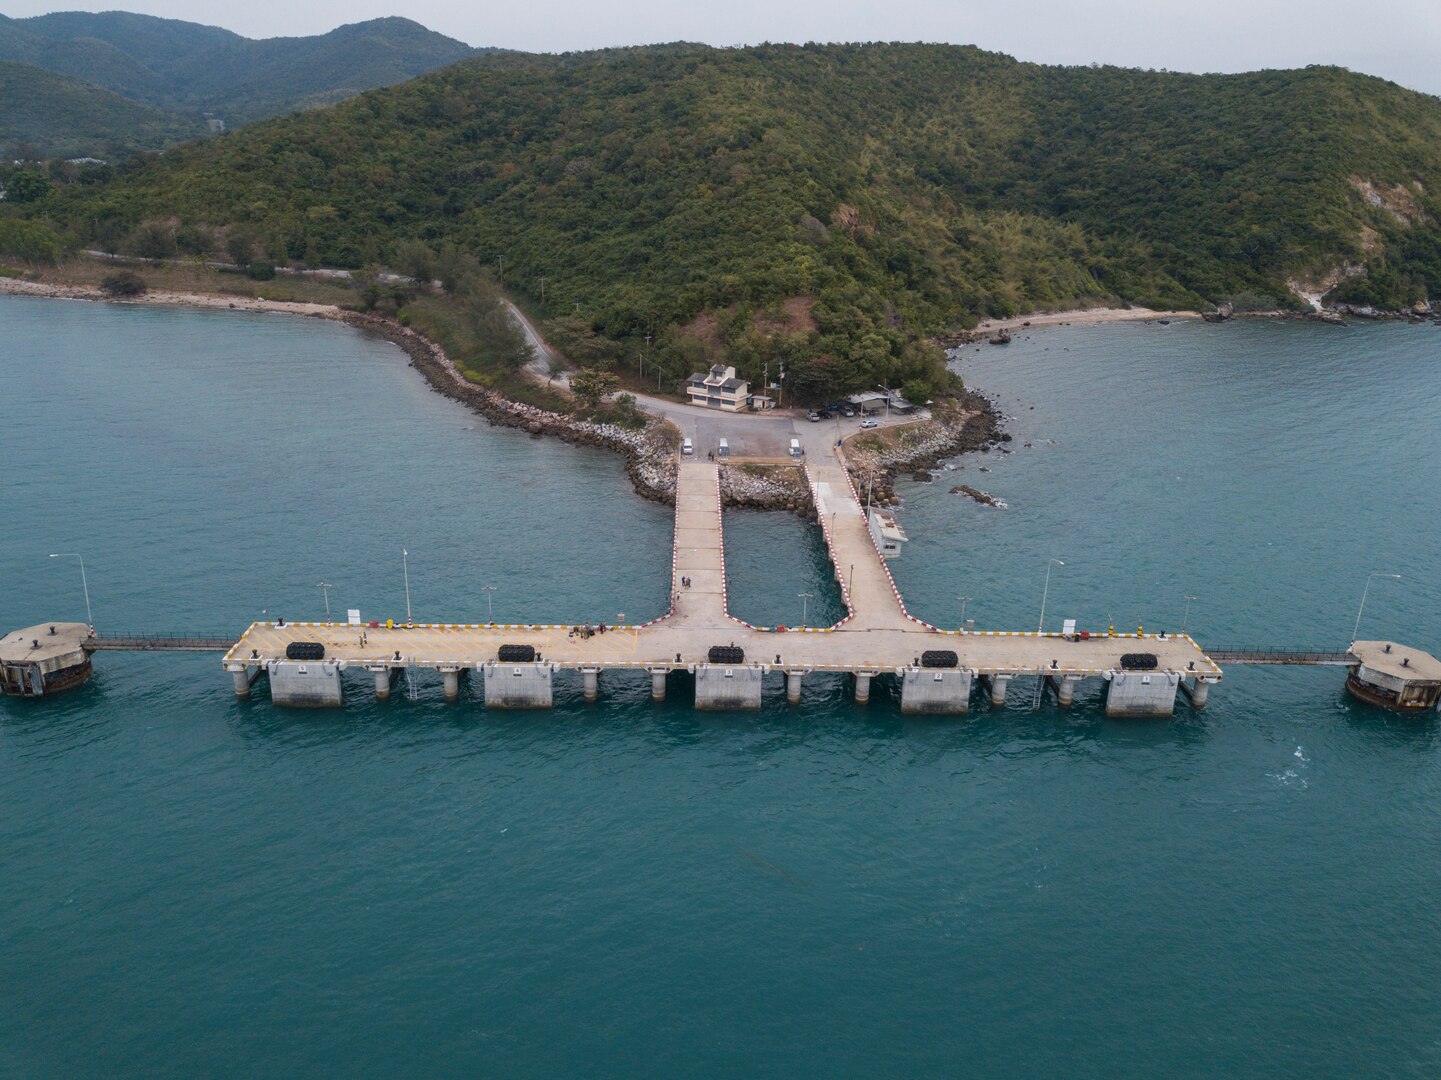 U.S. Navy Sailors assigned to Underwater Construction Team 2, stand on the Thung Prong Pier in Sattahip, Thailand during Exercise Cobra Gold Feb. 19, 2018. Cobra Gold 18 provides a venue for the United States, allied and partner nations to advance interoperability and increase partner capacity in planning and executing complex and realistic multinational force and combined task force operations.